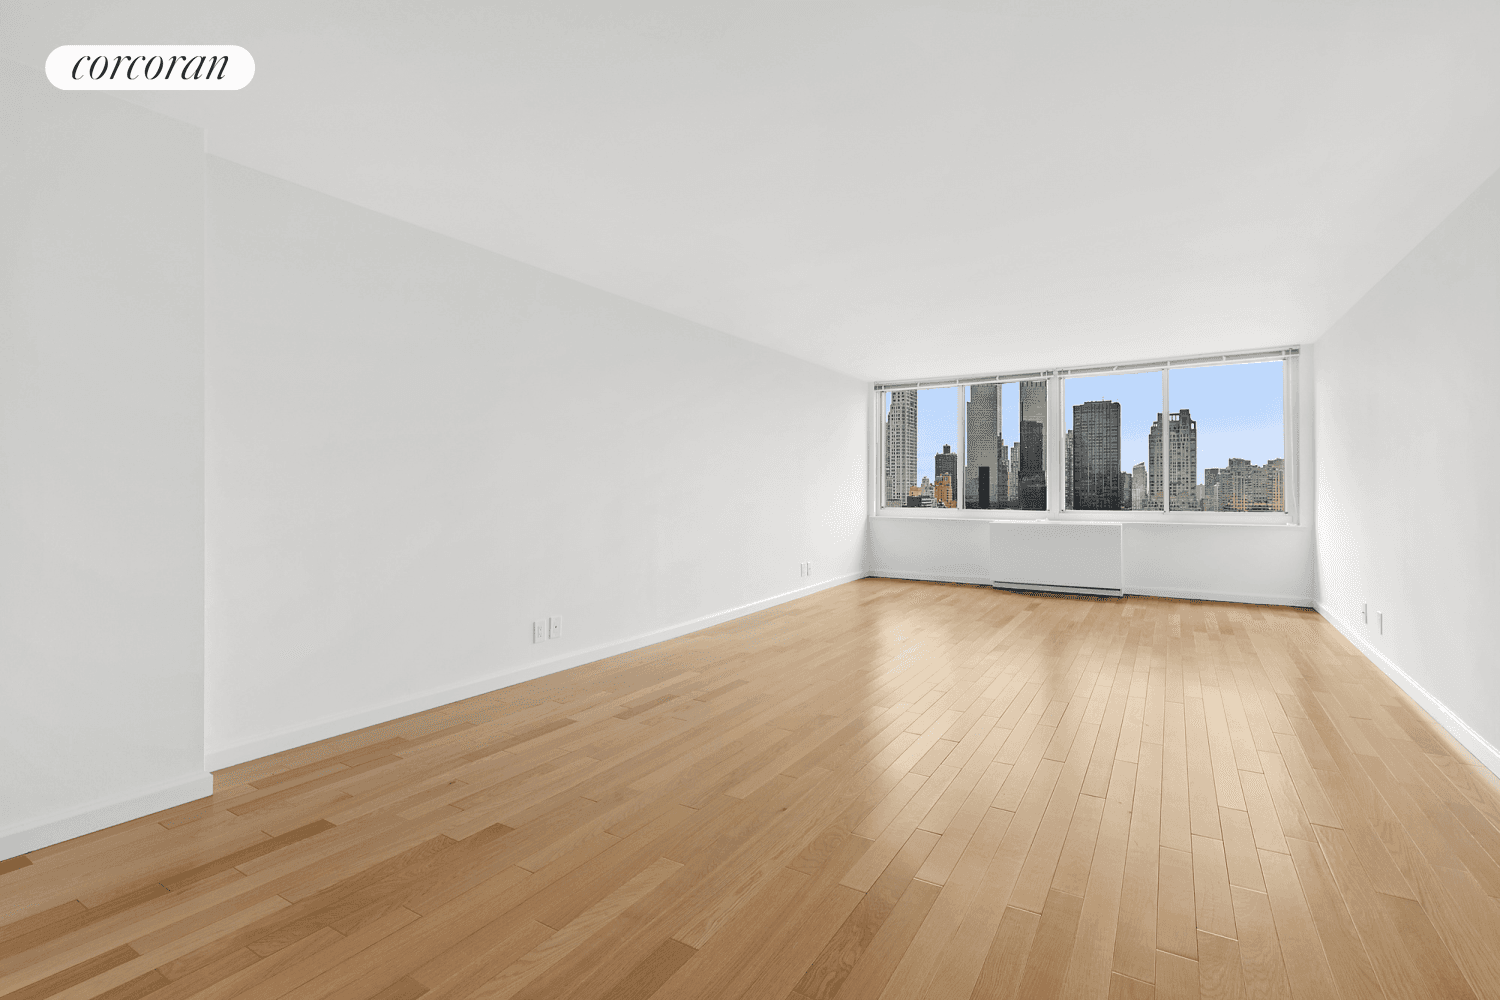 This truly exceptional high floor deluxe two bedroom apartment boasts East, North, and West exposures with unobstructed and sweeping Central Park Views with 2 bedrooms, 2.